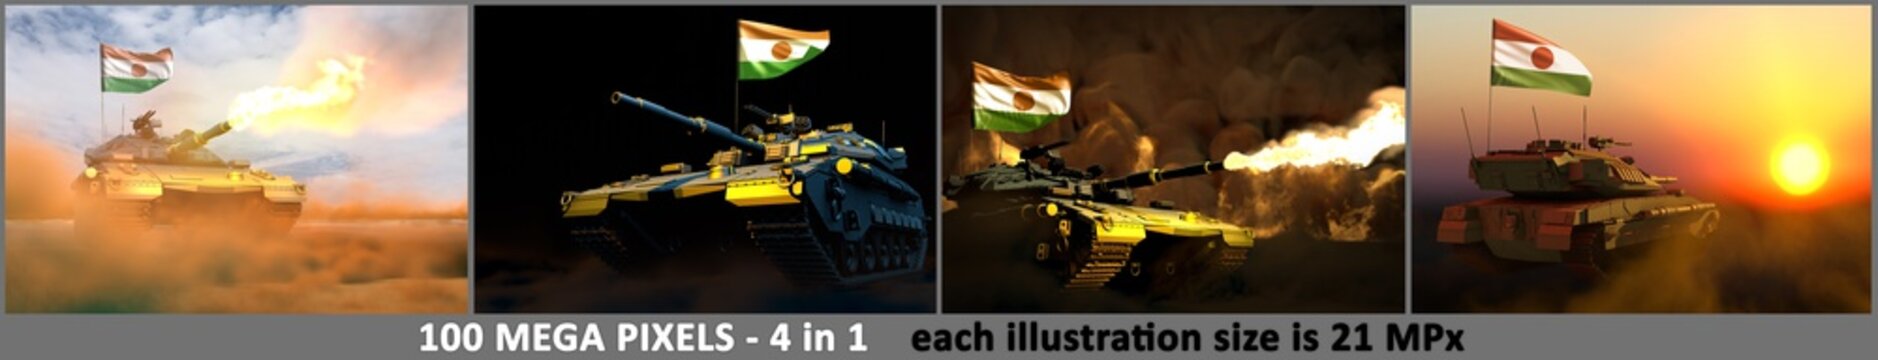 Niger army concept - 4 detailed images of tank with fictive design with Niger flag and free place for your text, military 3D Illustration